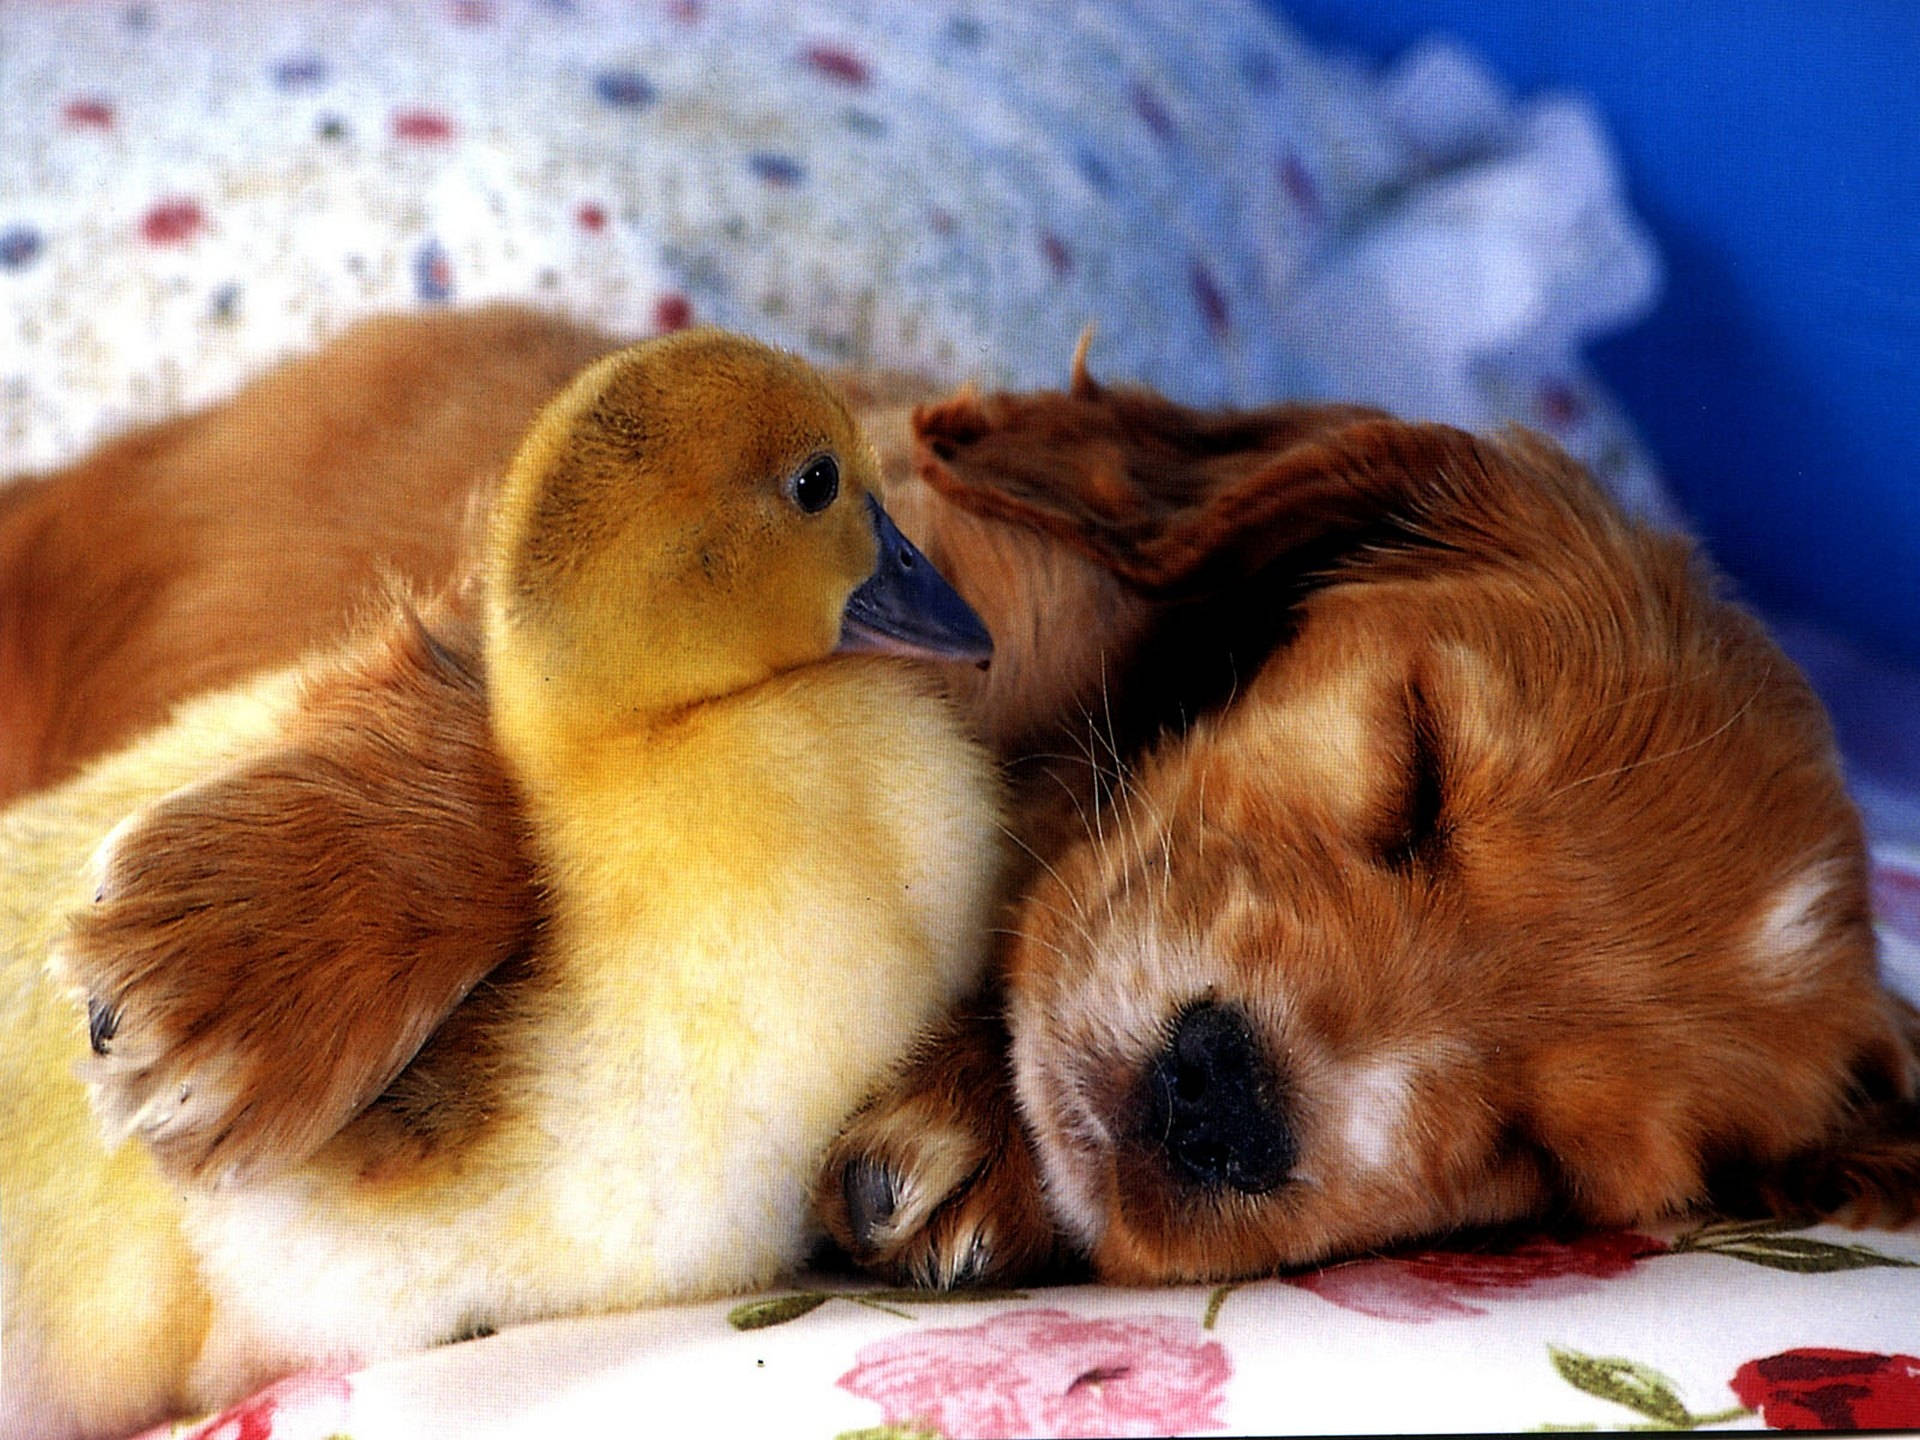 Sleeping Puppy And A Duckling